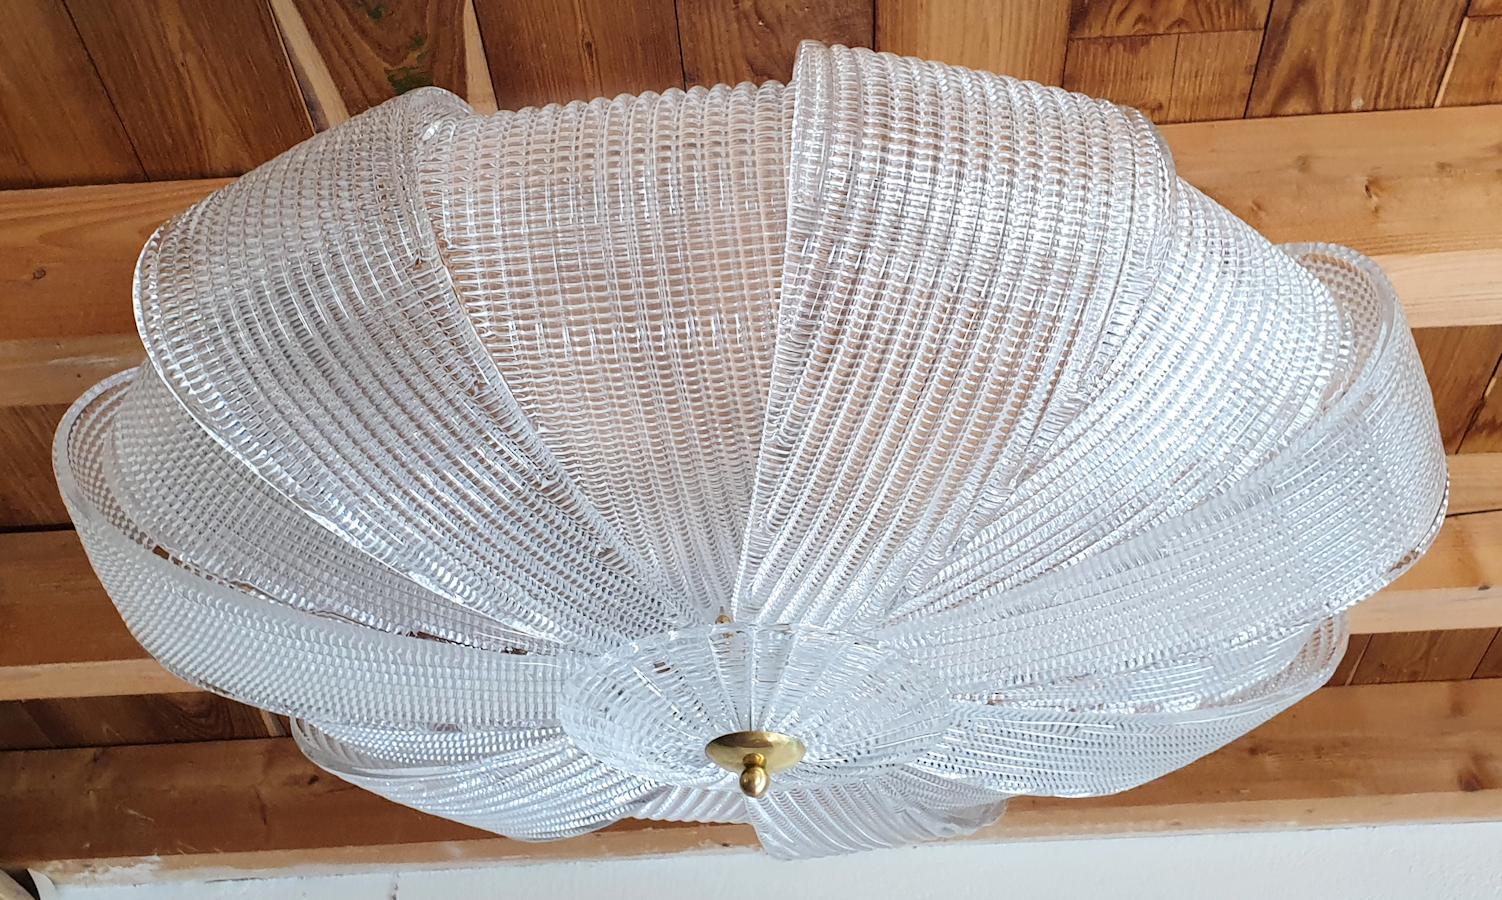 Large round Mid-Century Modern Murano clear textured glass flush mount ceiling lights, Barovier and Toso style, Italy circa 1970s.
The large vintage chandelier has white painted mounts. has been cleaned.
The Murano flush mount has 8 lights, and is